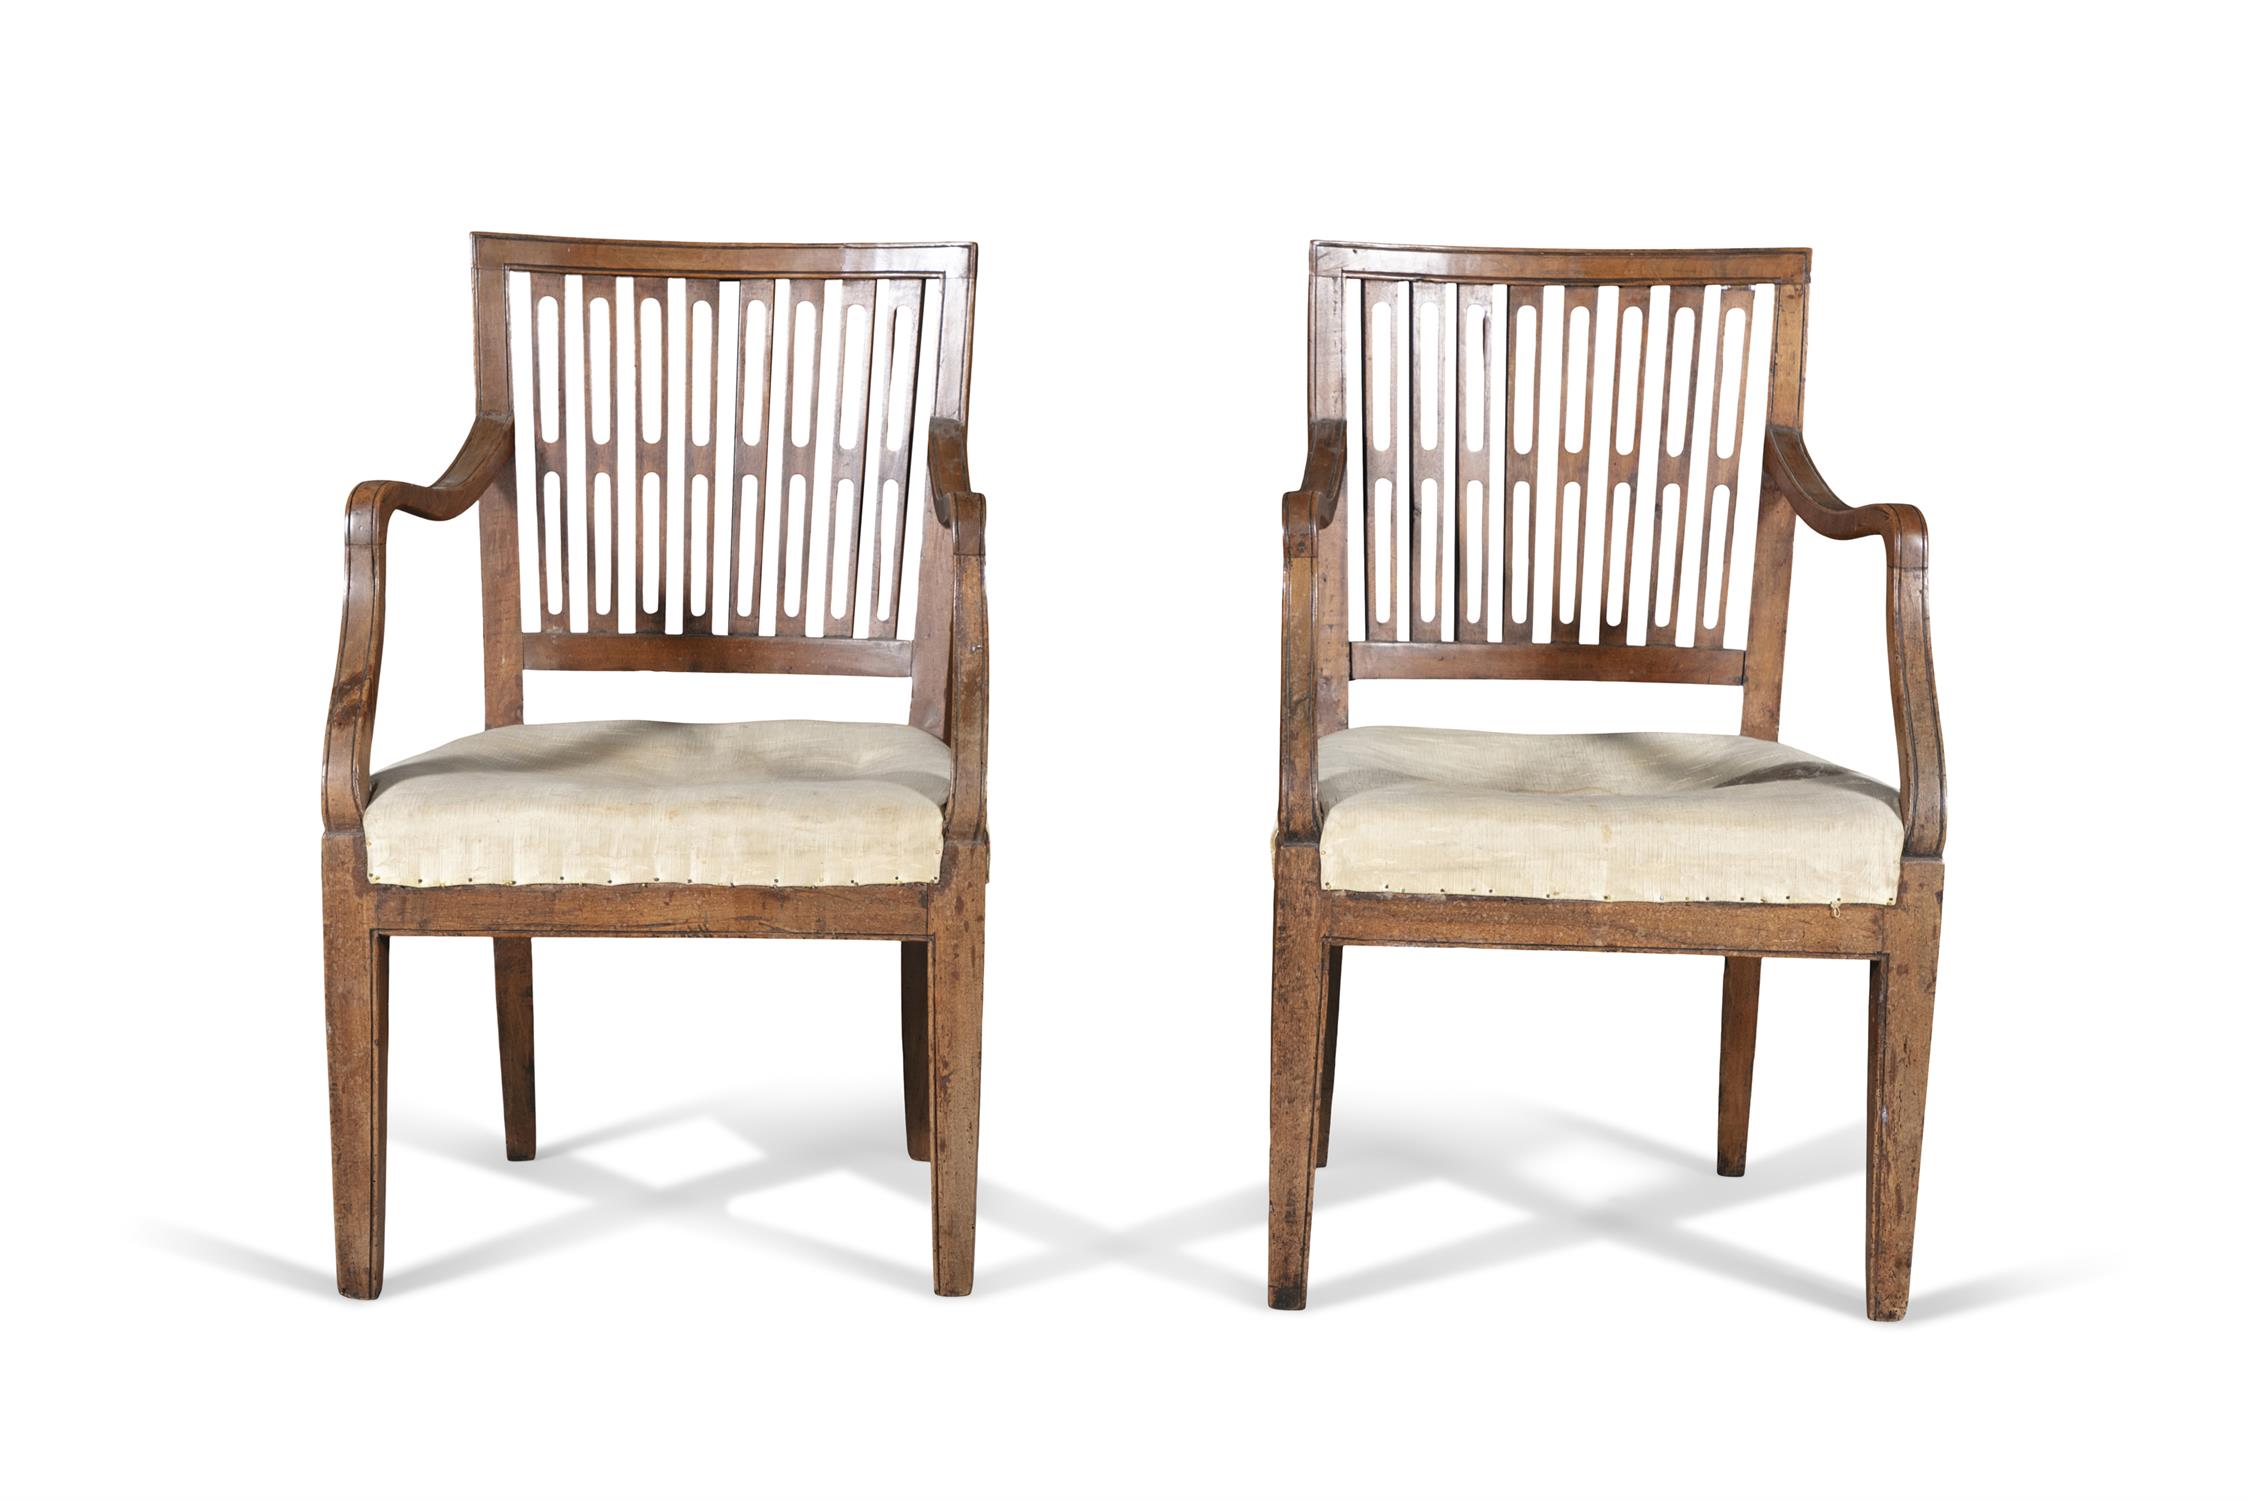 A PAIR OF GEORGE III MAHOGANY OPEN ARMCHAIRS, LATE 18TH CENTURY, the square backs filled with - Image 2 of 5